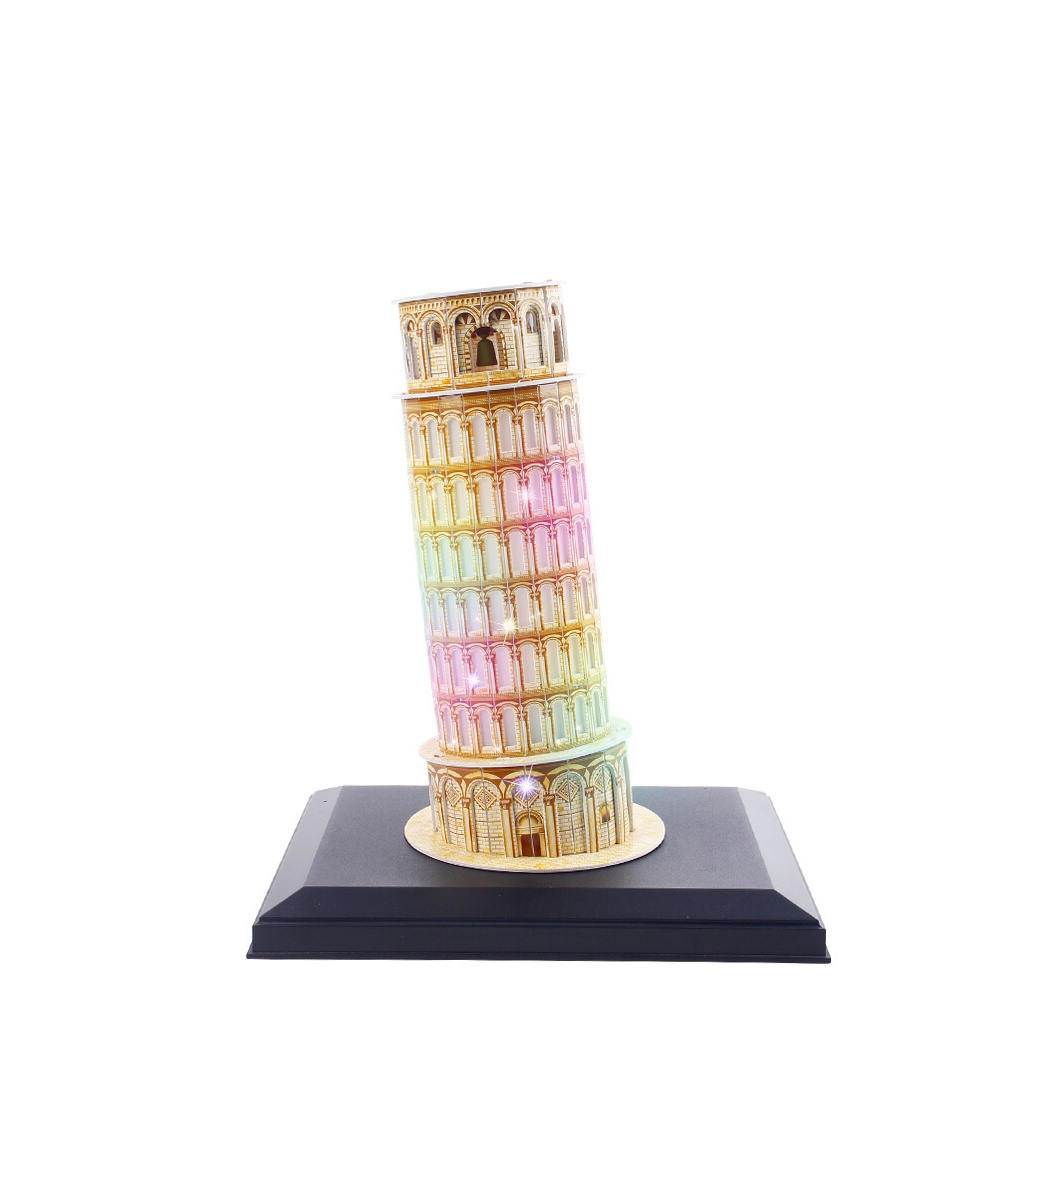 3d puzzle tower of pisa with led CUBICFUN 15 piece Educational a0102